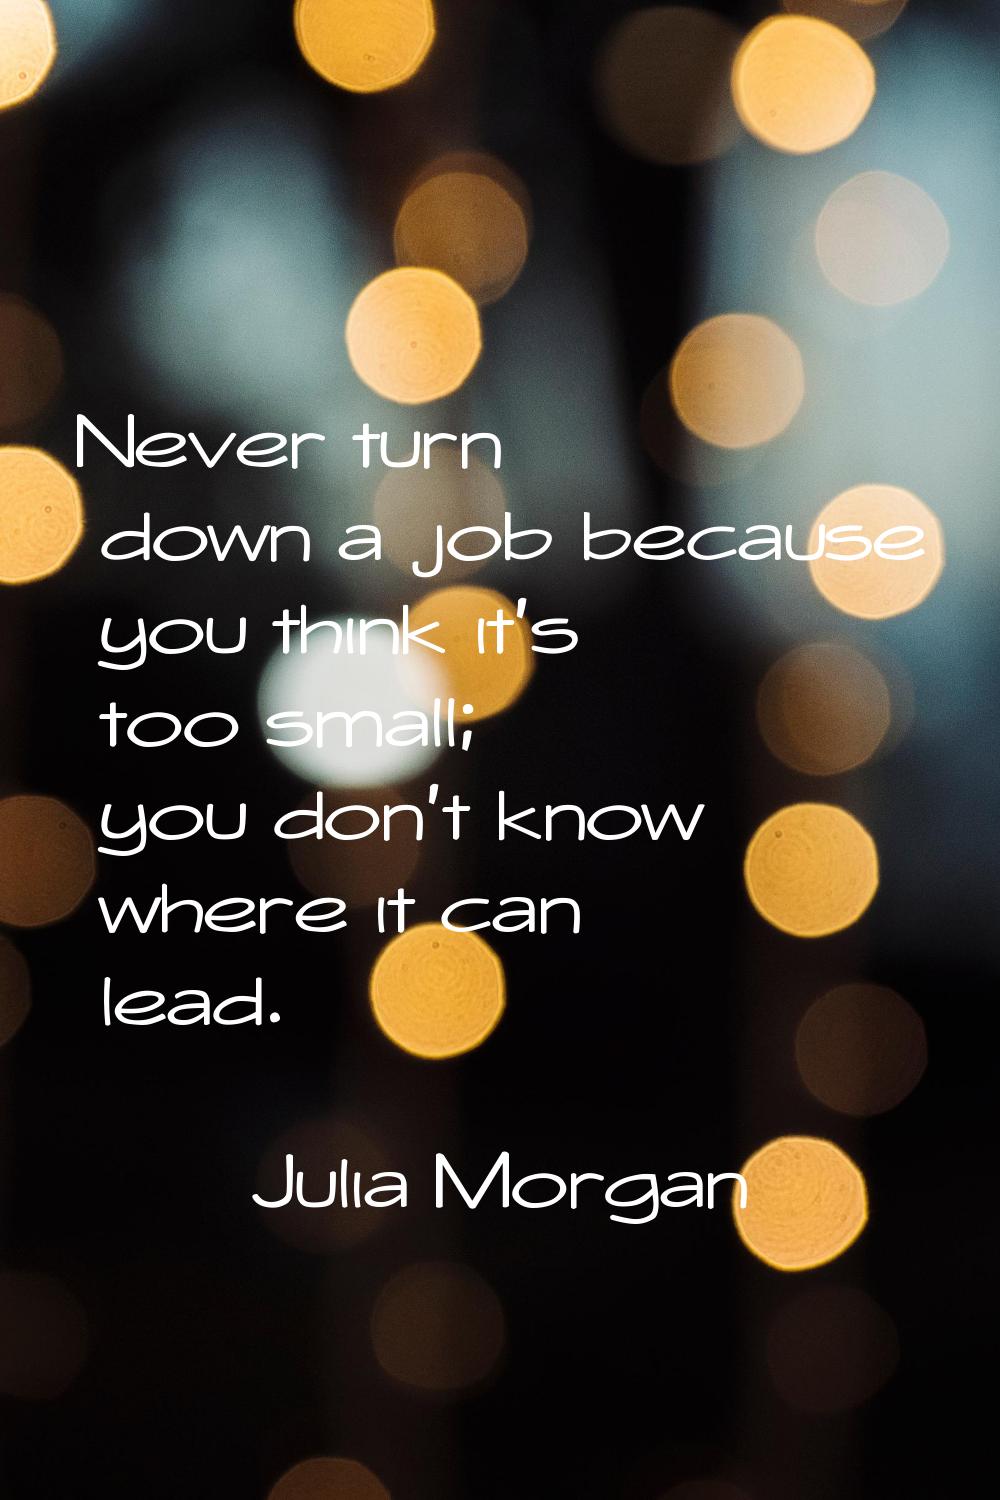 Never turn down a job because you think it's too small; you don't know where it can lead.